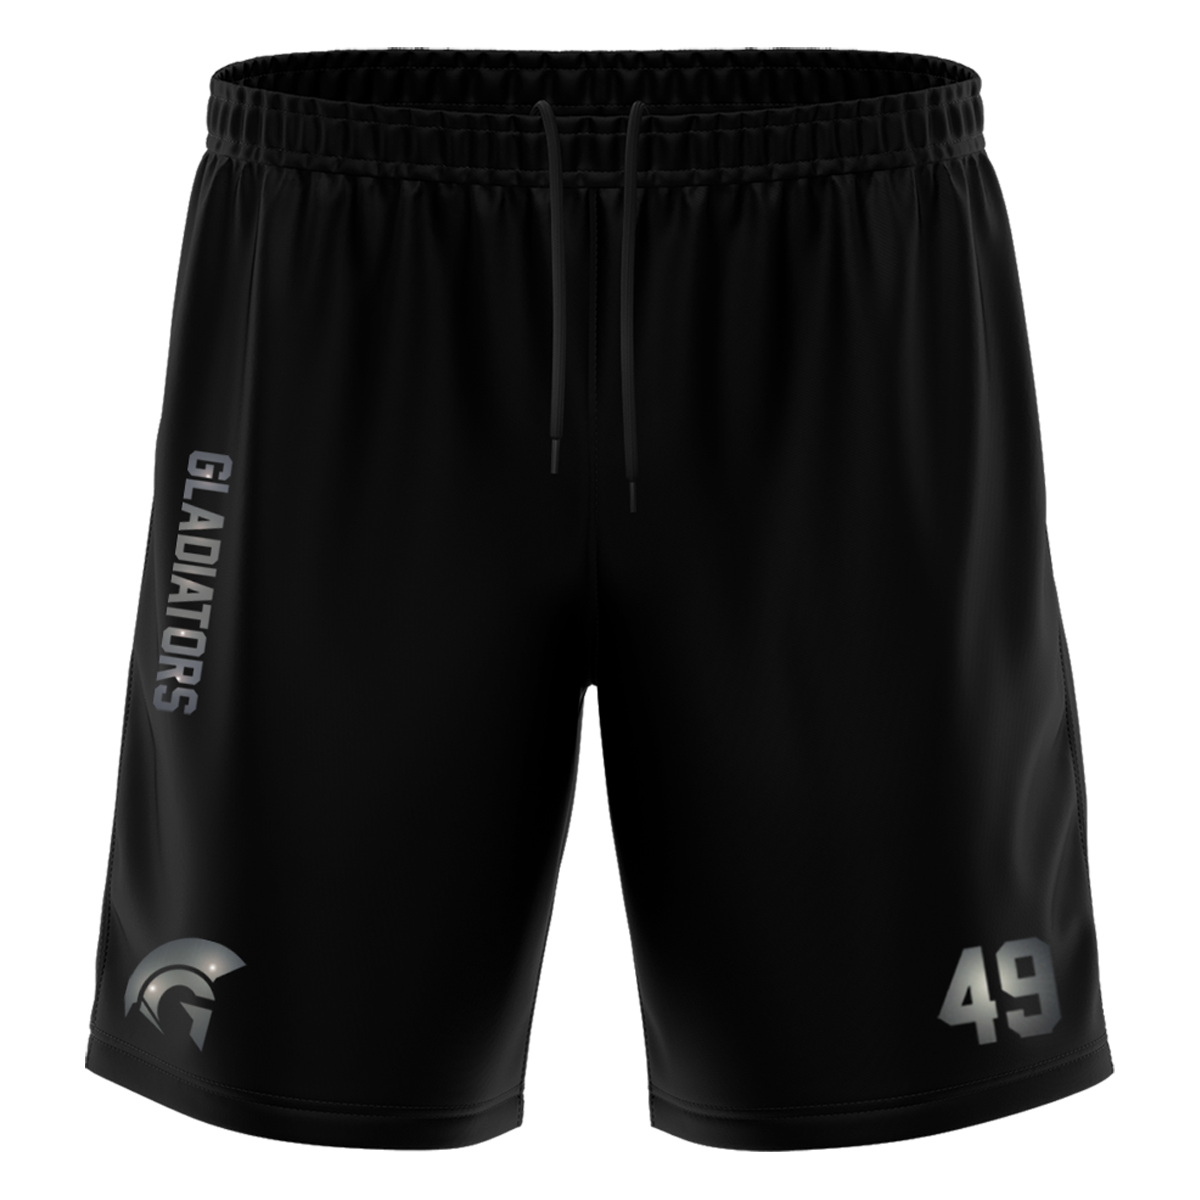 Gladiators "Blackline" Training Short with Playernumber or Initials